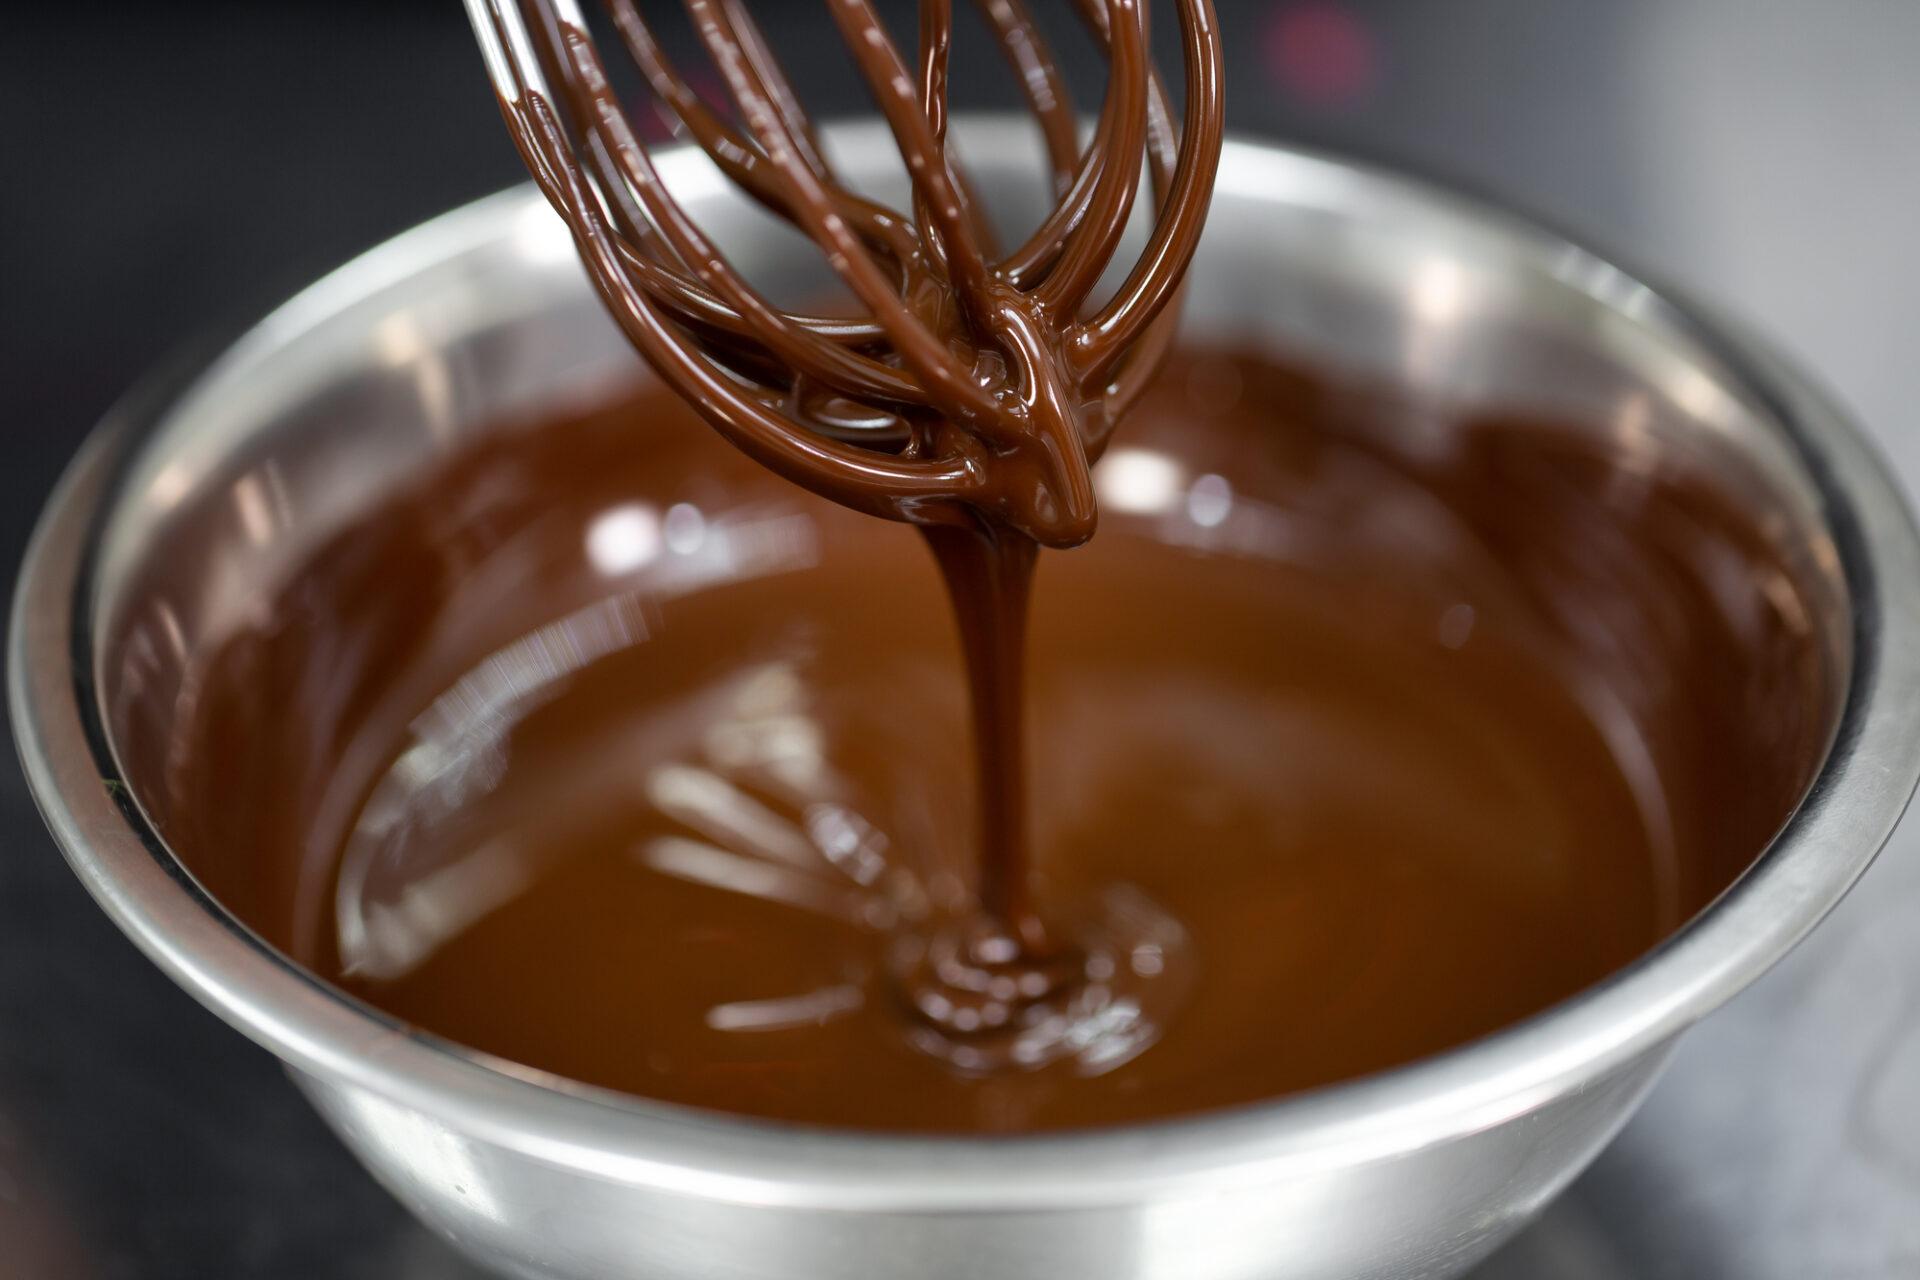 pastry chef whips melted chocolate in a bowl with a metal wire whisk close up.